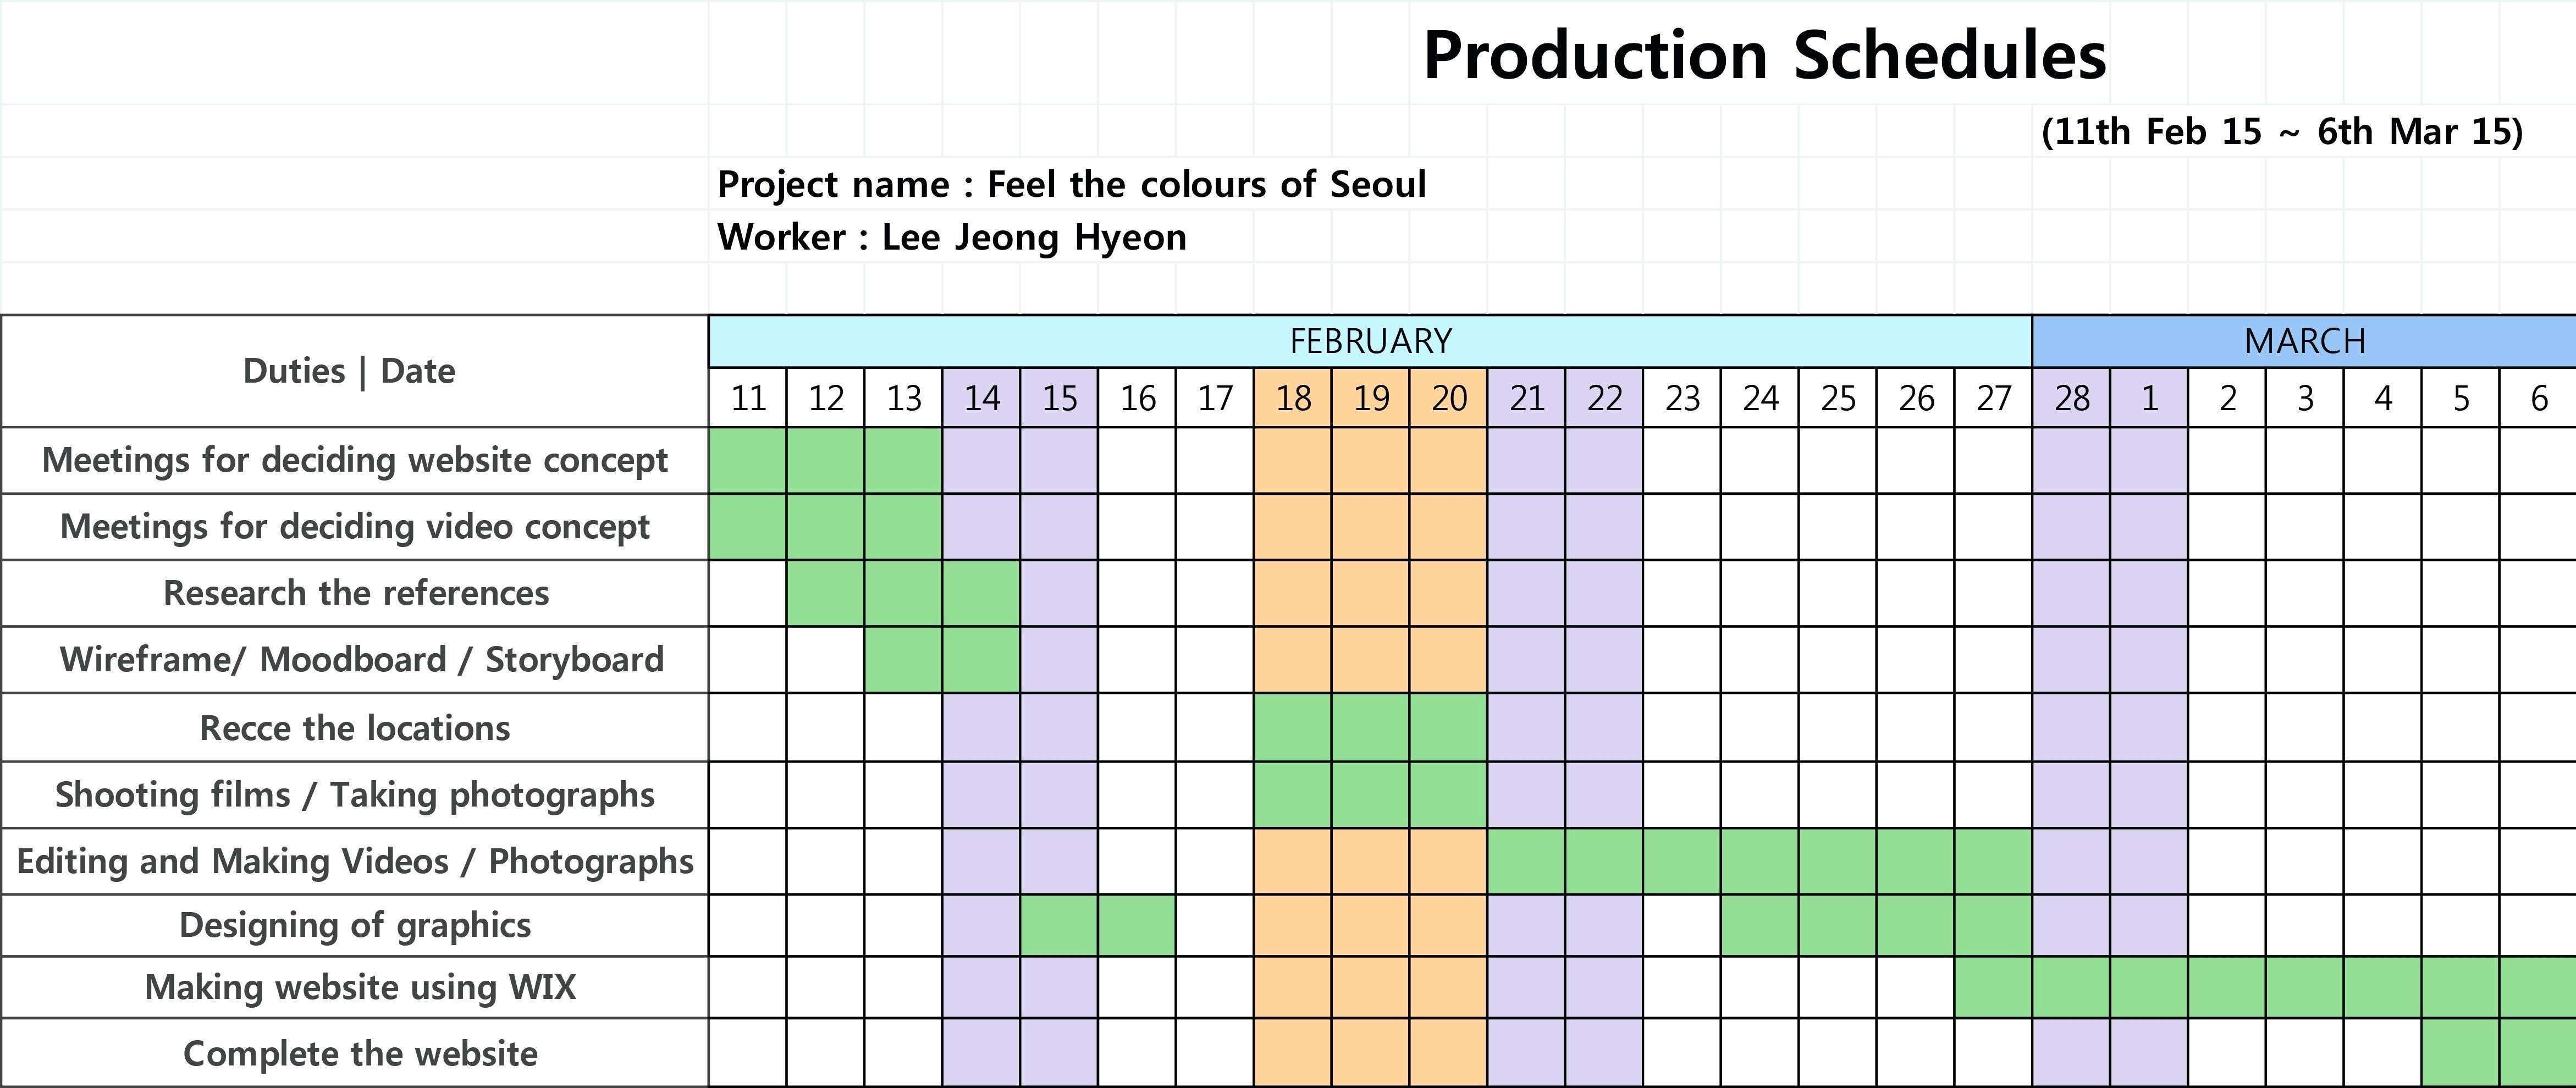 Master Production Schedule Template Excel Beautiful Production Images